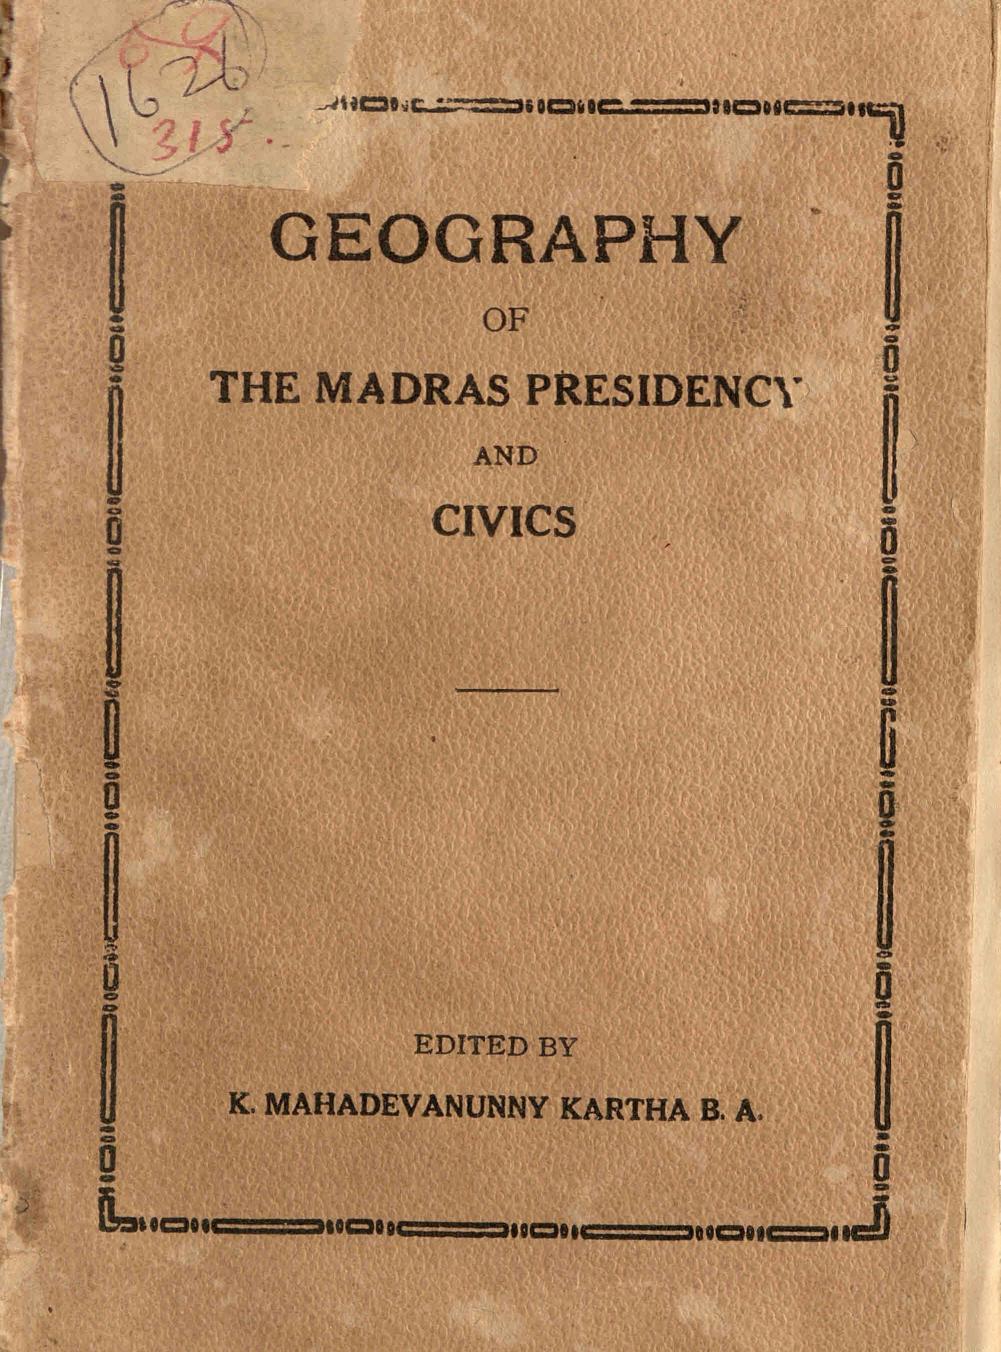 1936 - Geography of Madras Presidency and Civics